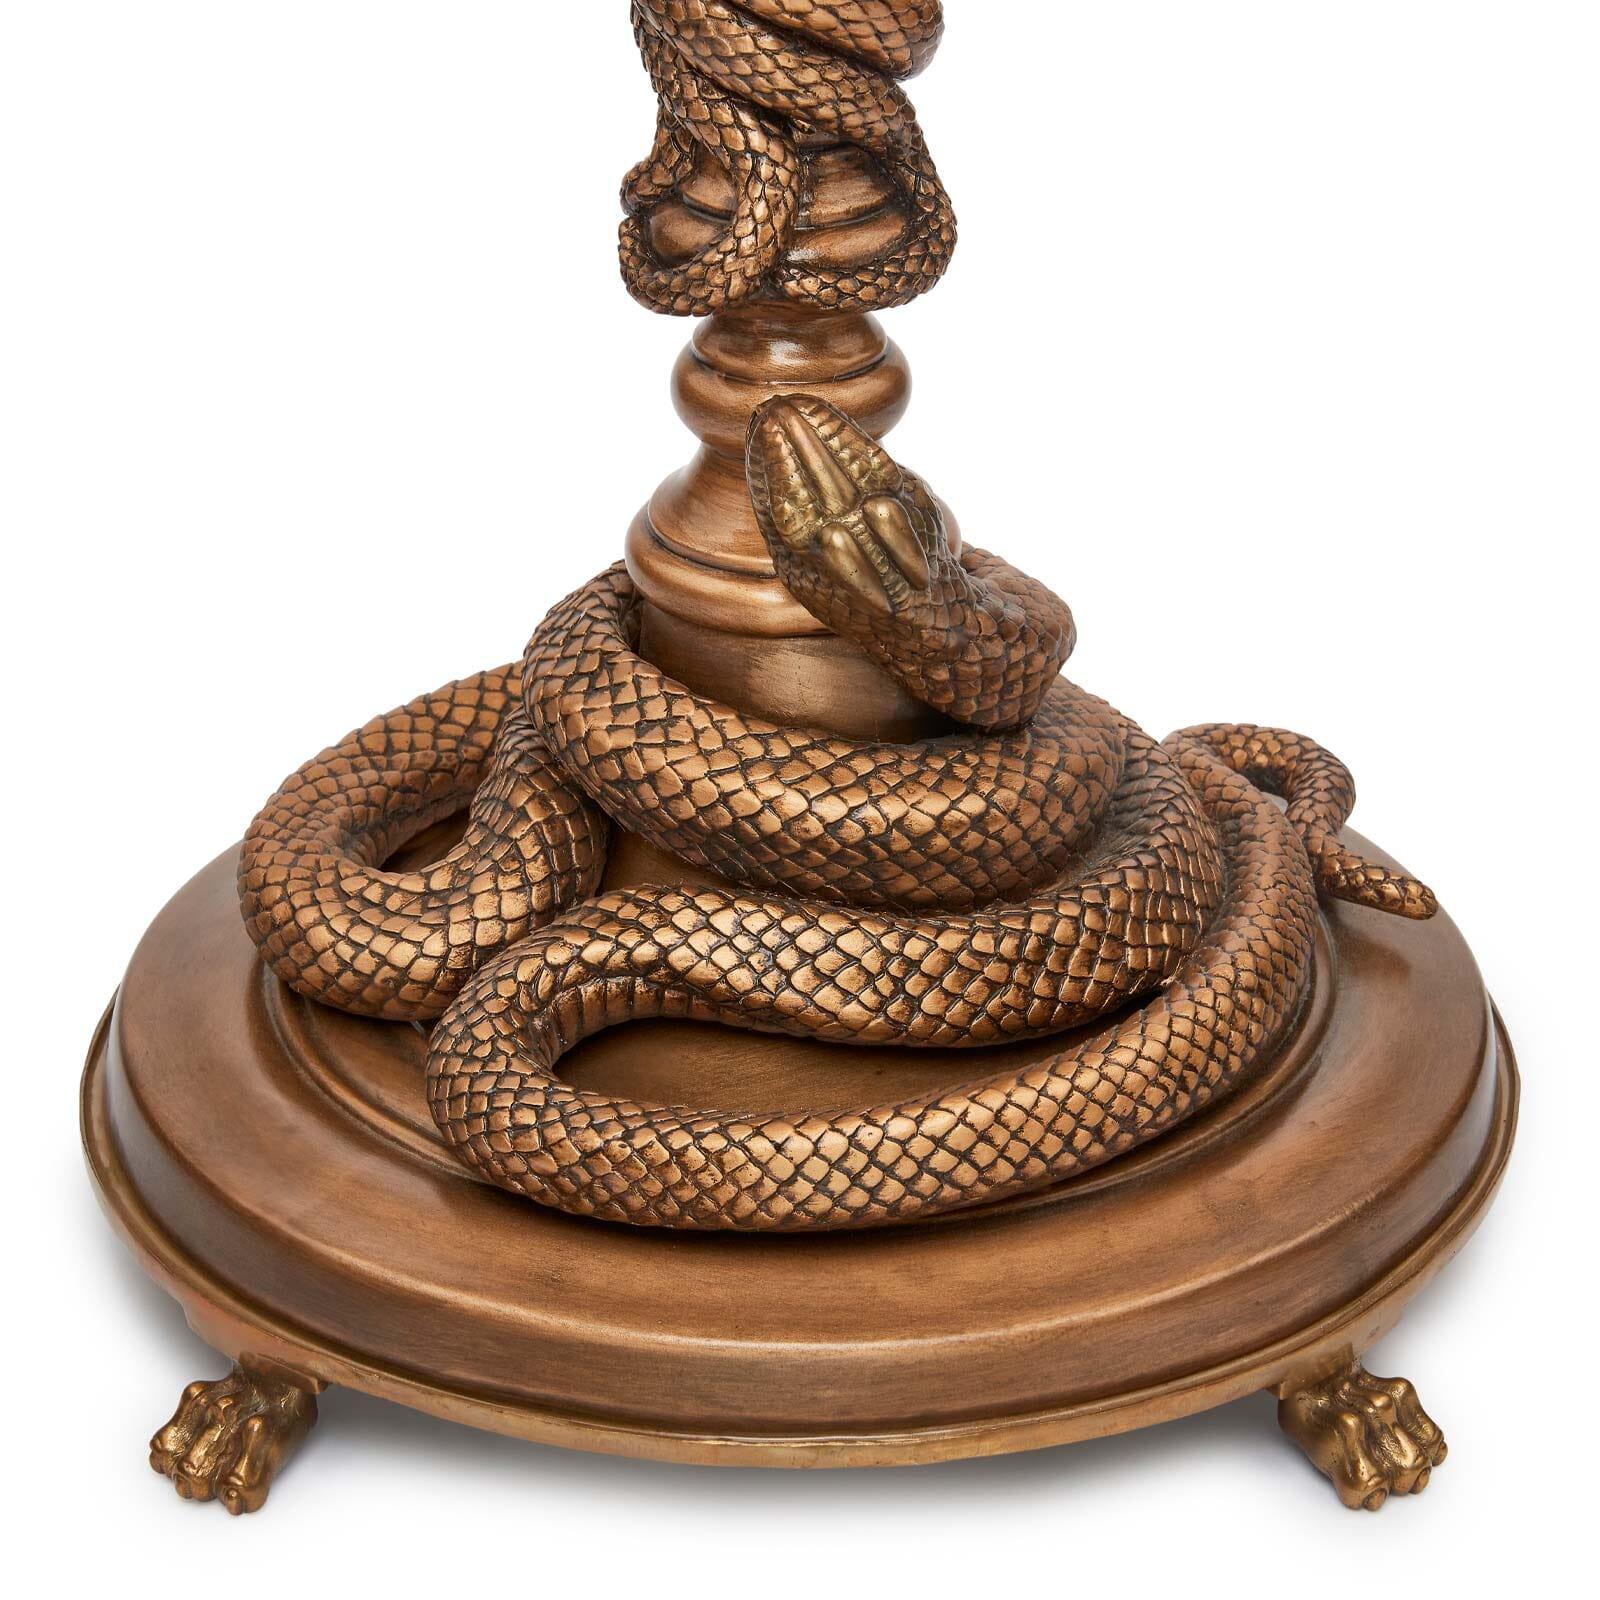 In our House, nobody puts side tables in the corner. Designed to take pride of place in any room, the SERPENTIS is enwrapped with gilded snakes (intricately carved by hand so that each piece is unique) and comes complete with an elegant glass top as